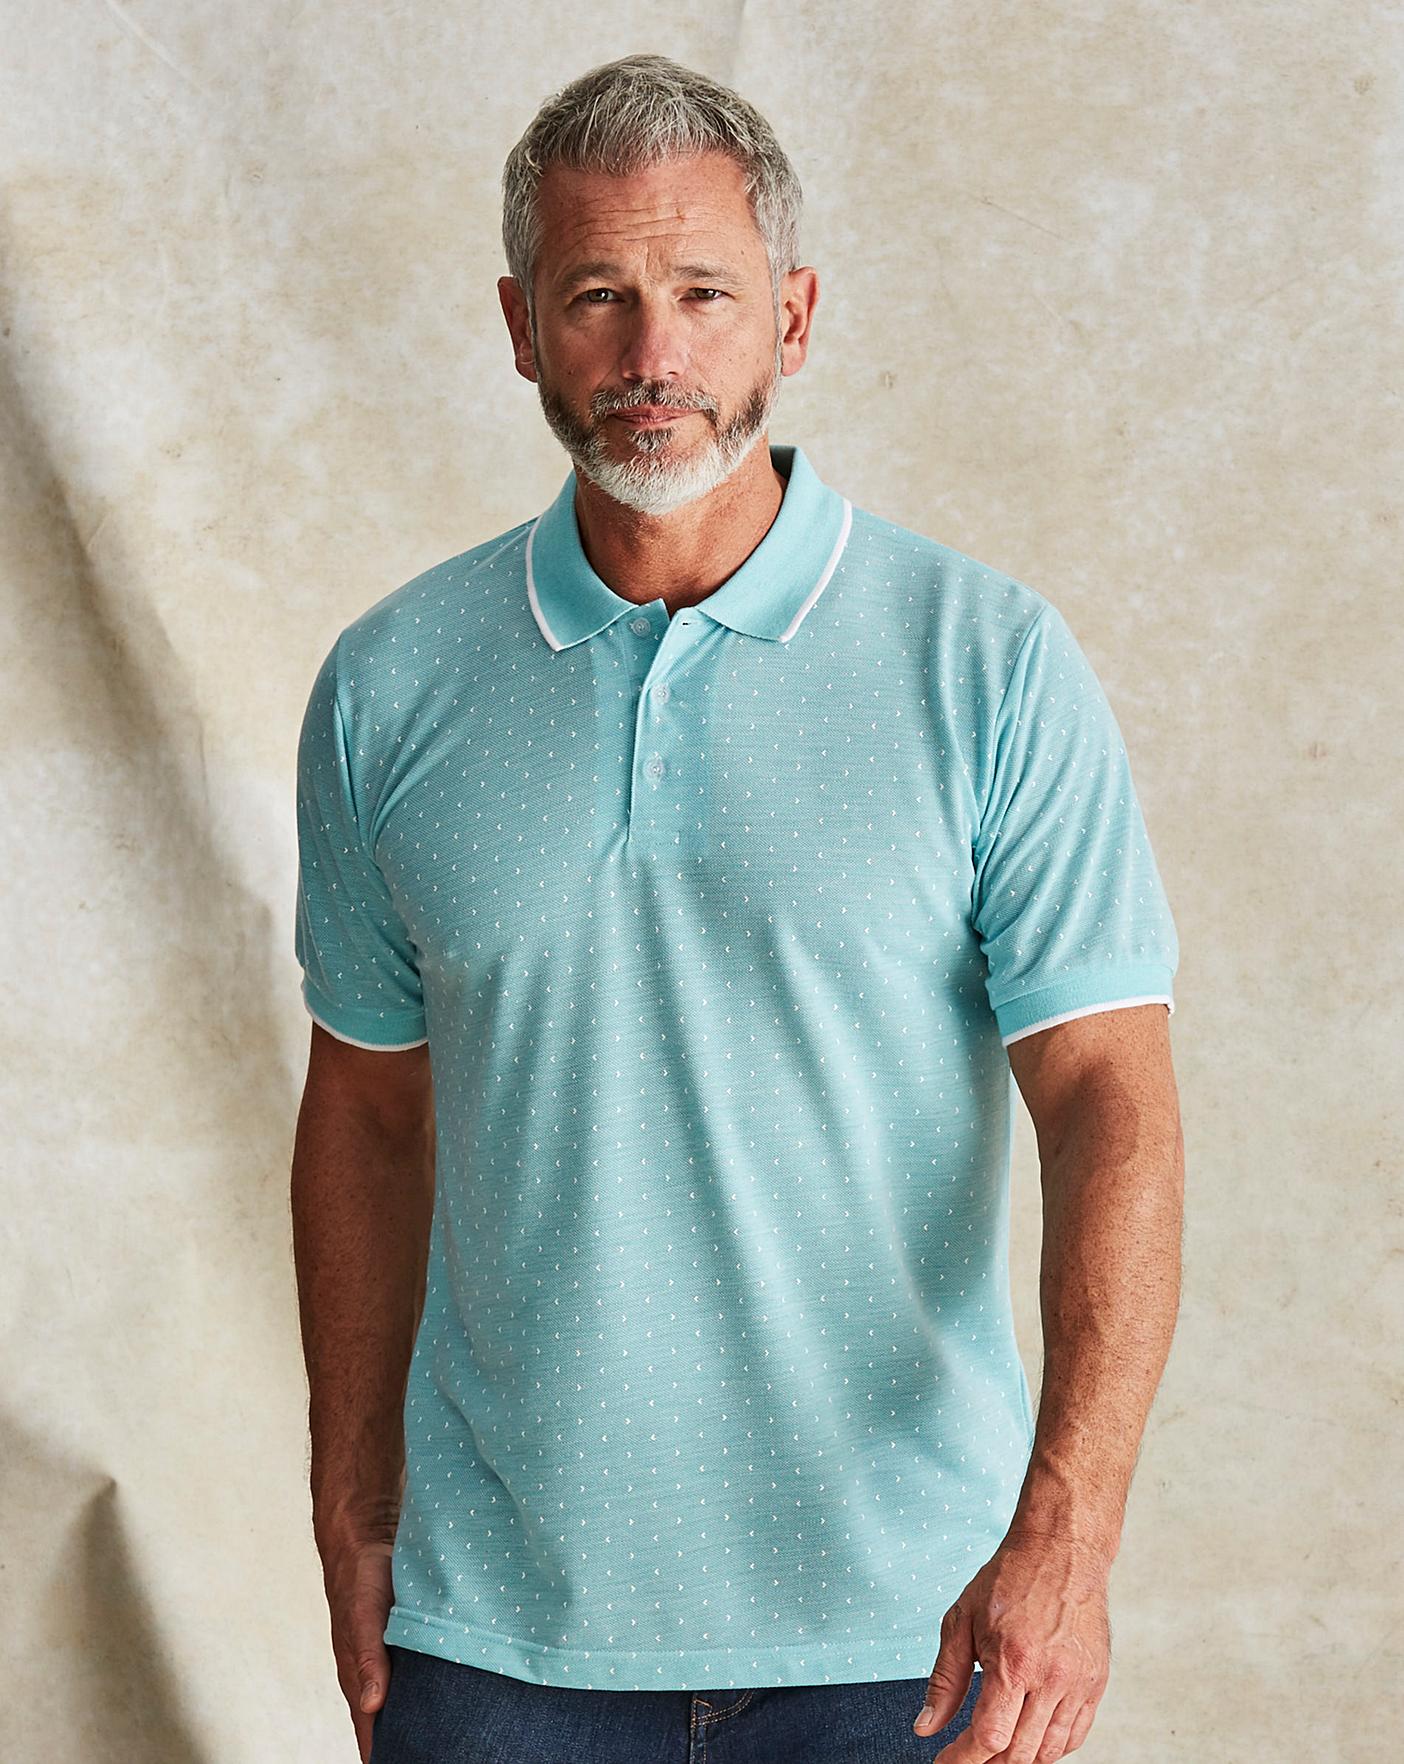 Polo Shirts With Longer Short Sleeves Top Sellers, 54% OFF 